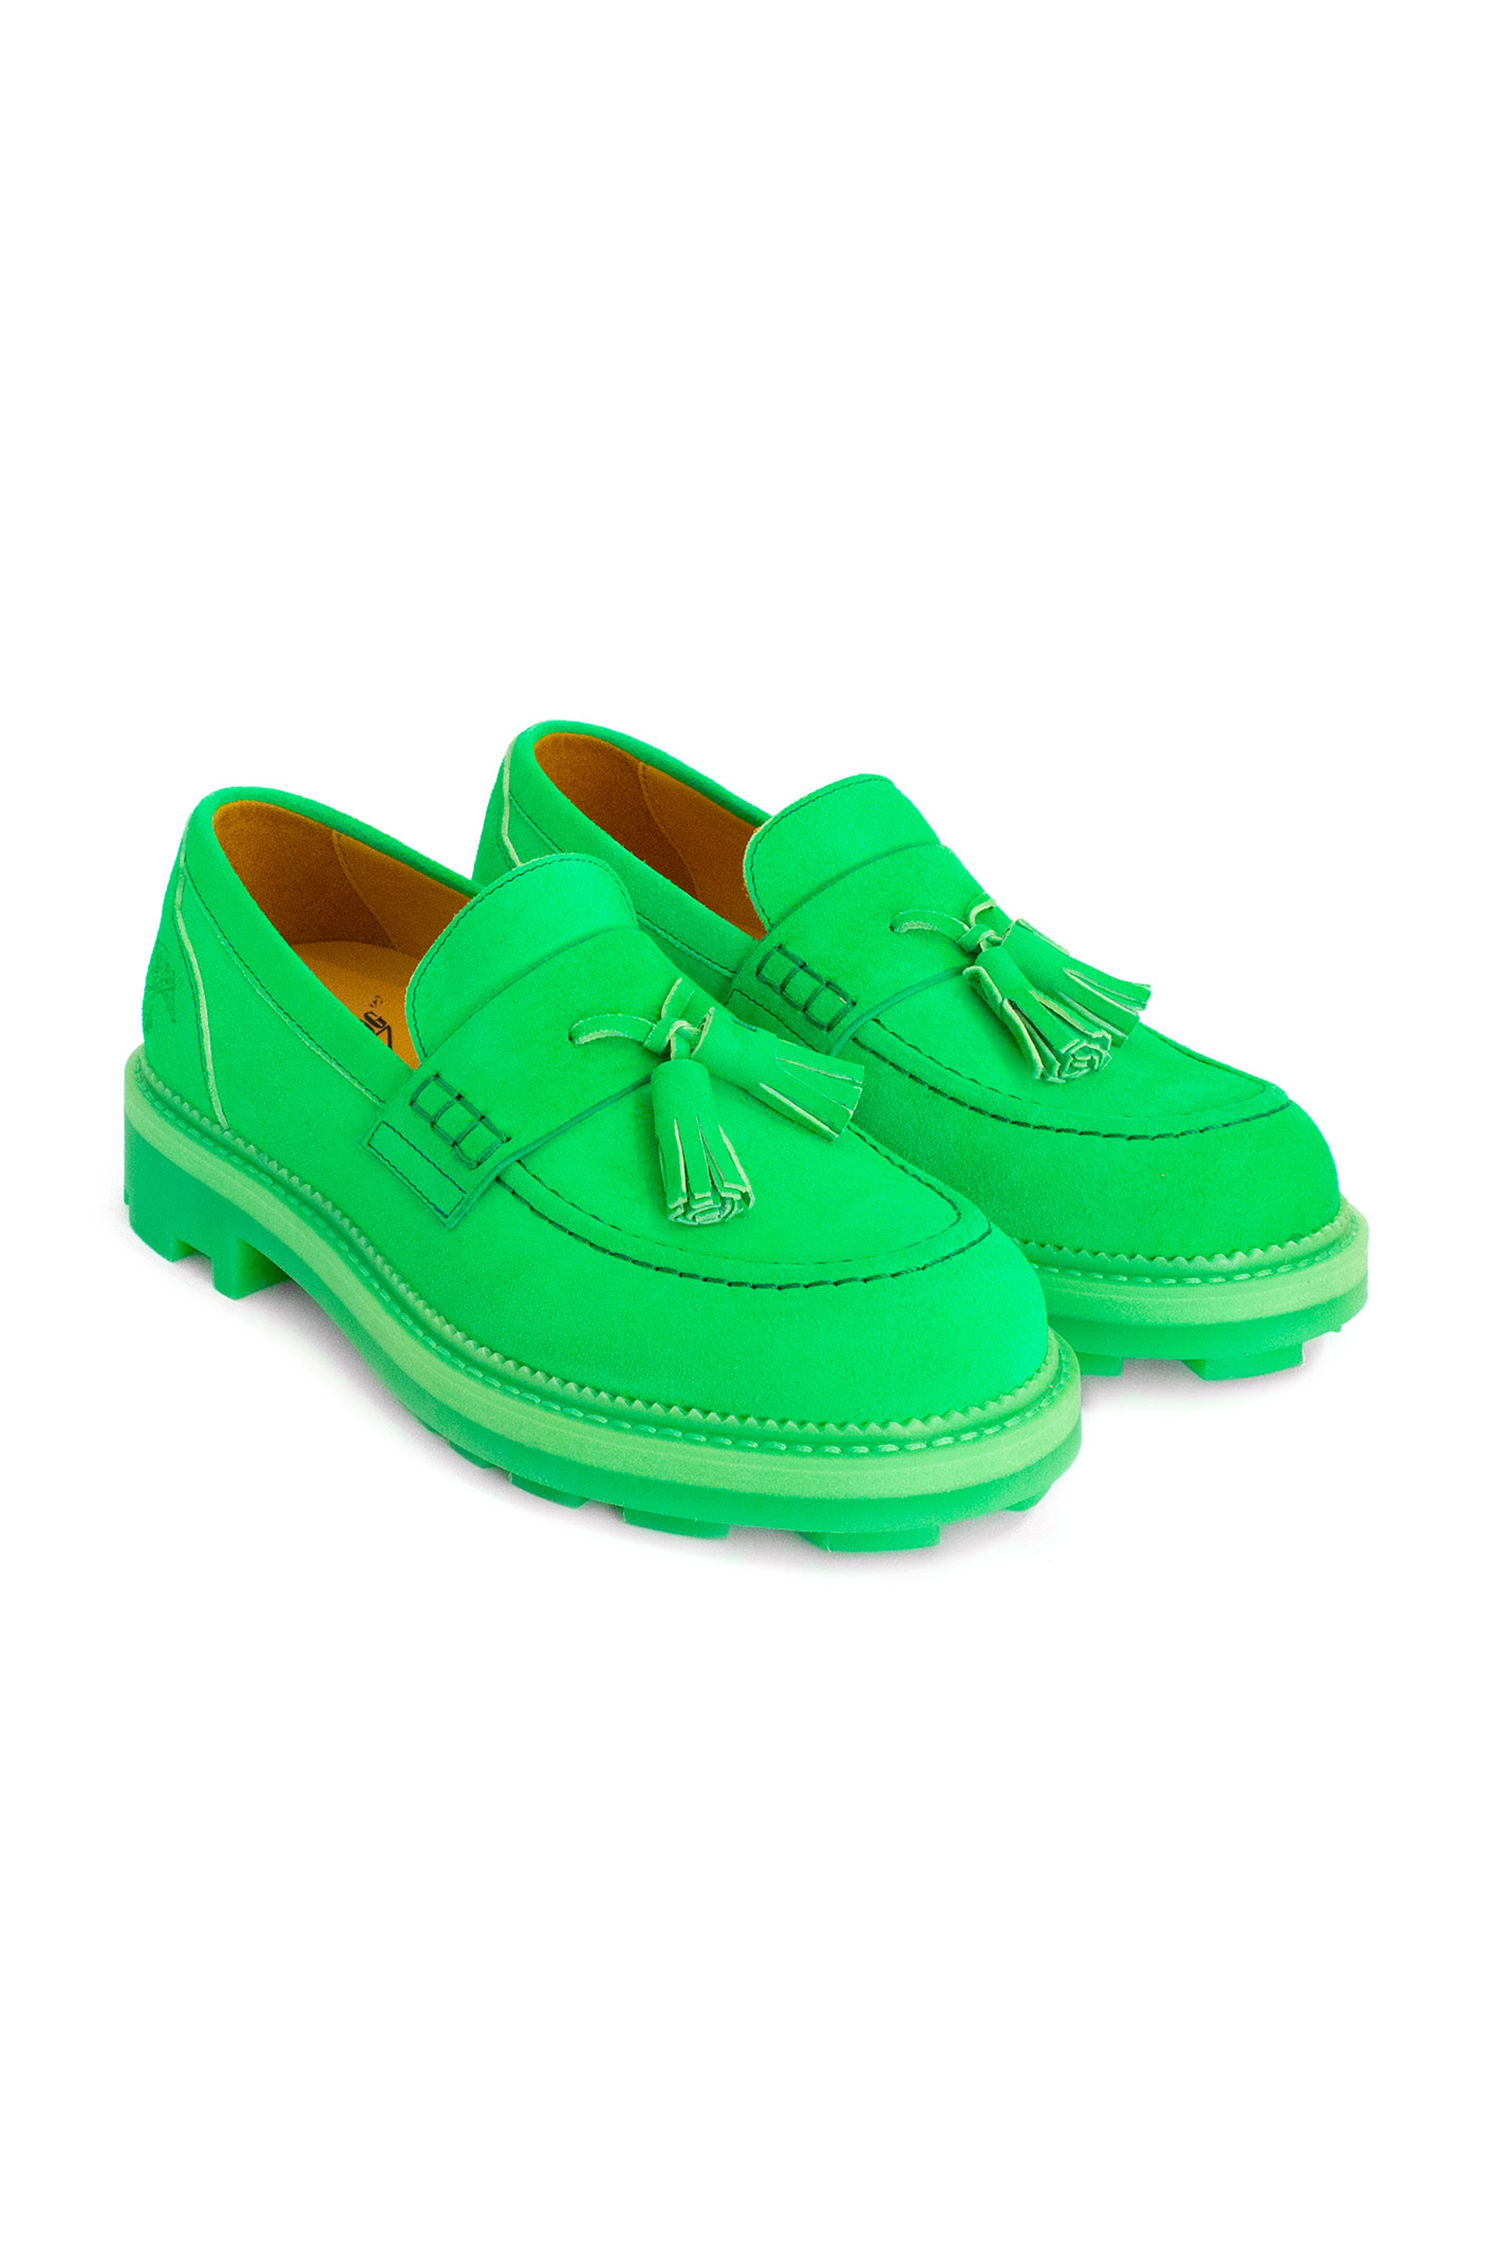 Anna Sui x John Fluevog Loafers Glo Green, with a passant front with tassels , large light green stiches on hems